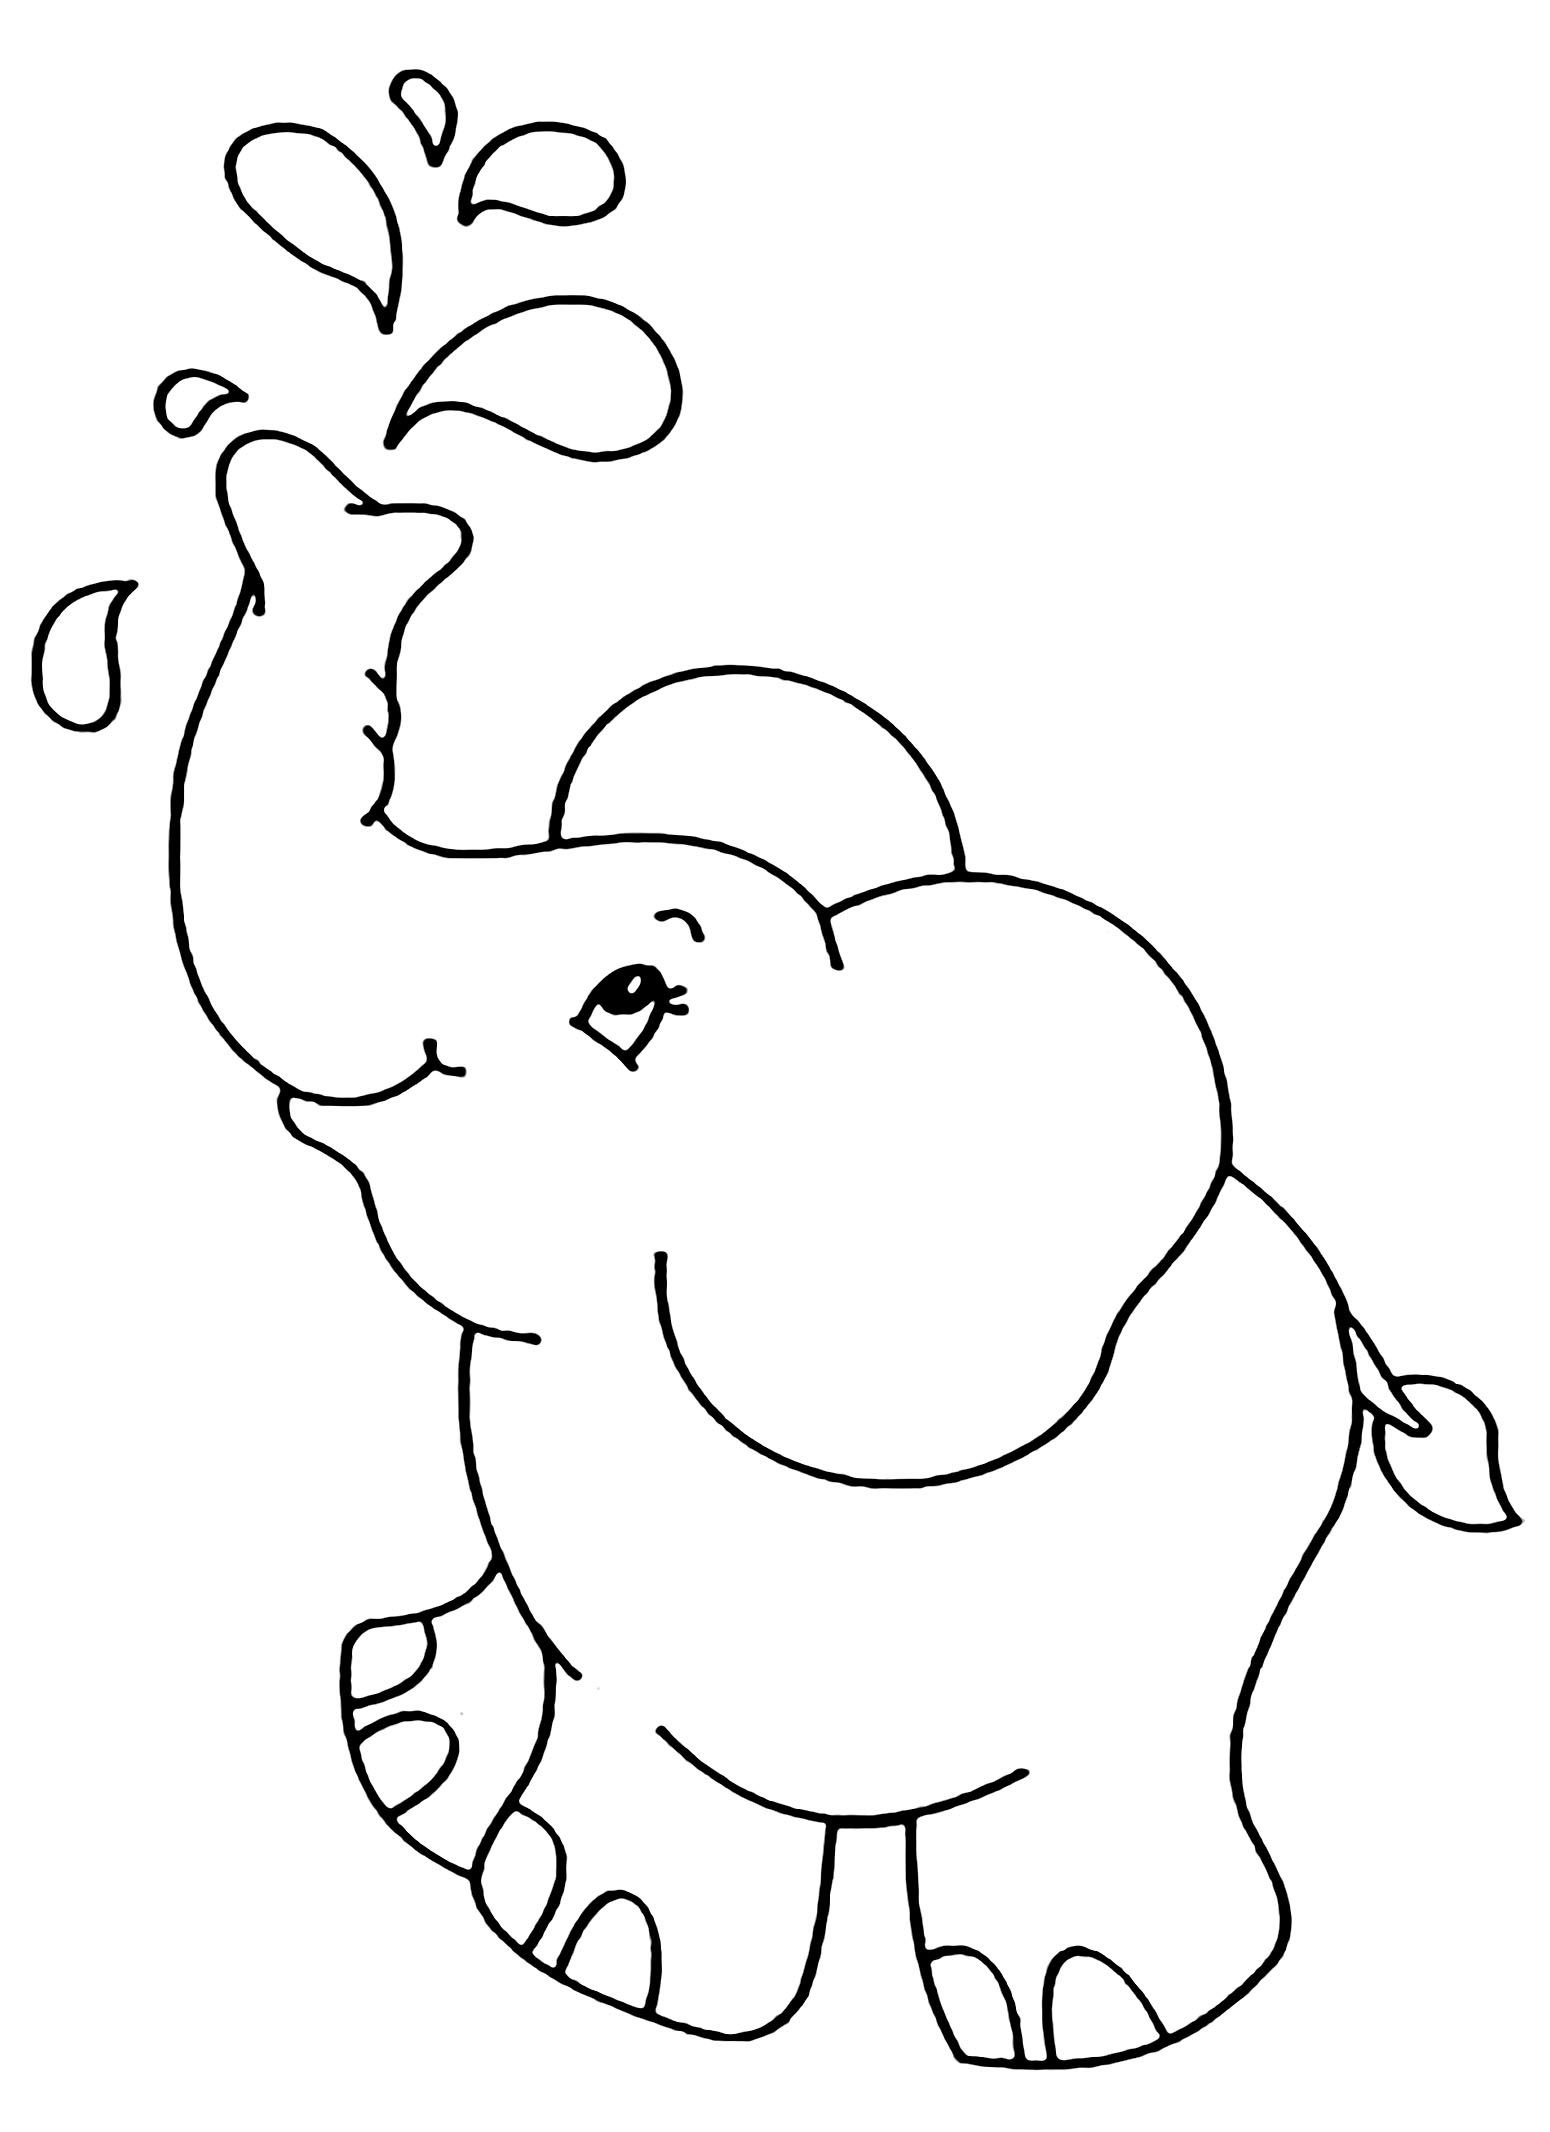 Elephant drawing to print and color